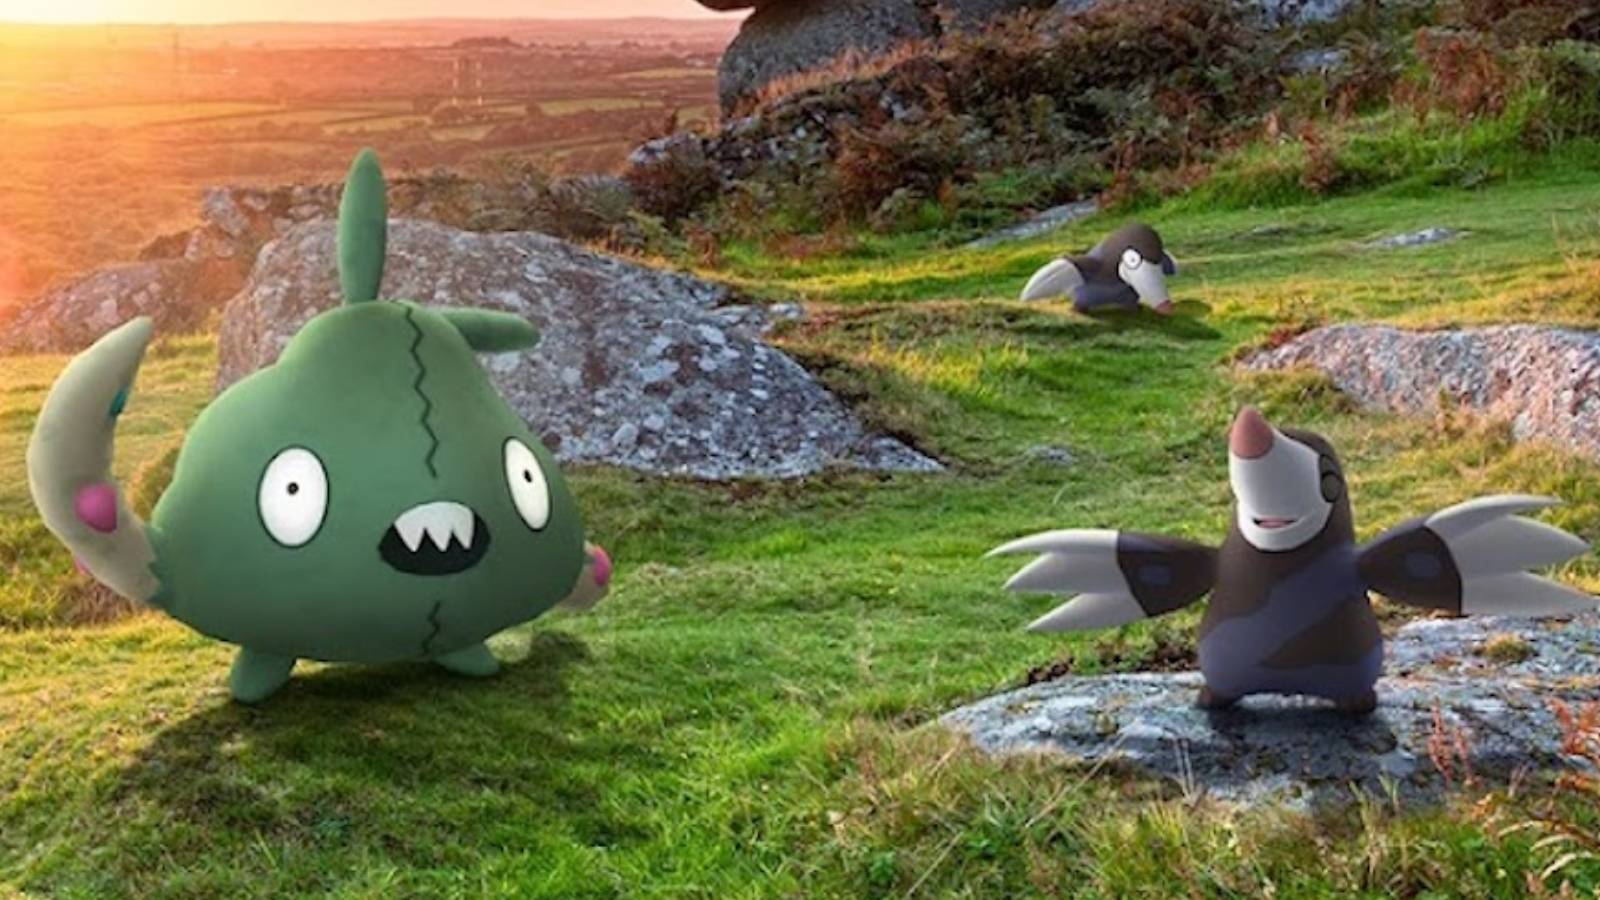 Key art for Pokemon Go sustainability week shows Trubbish and Drilbur